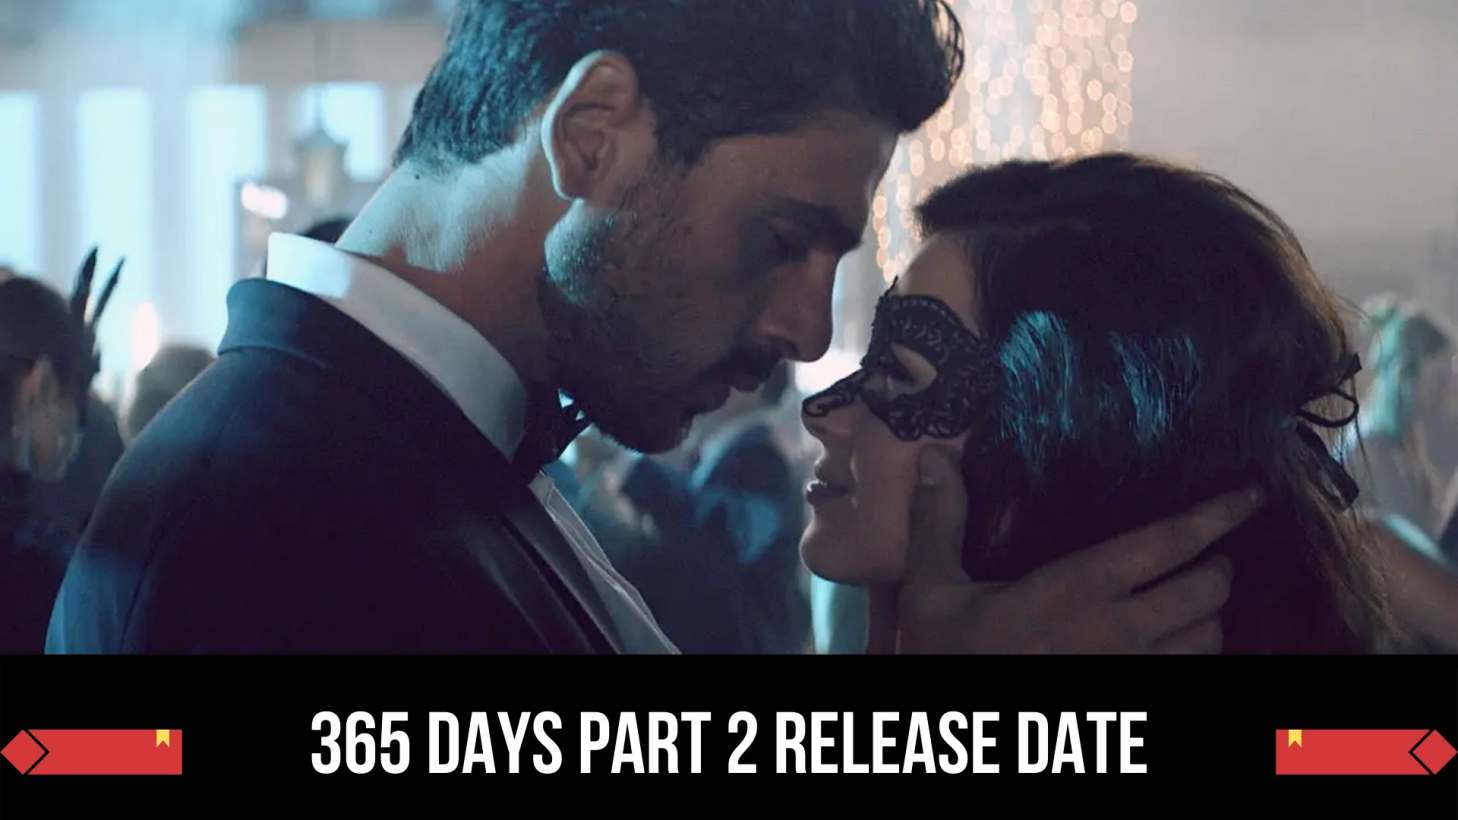 365 days part 2 release date